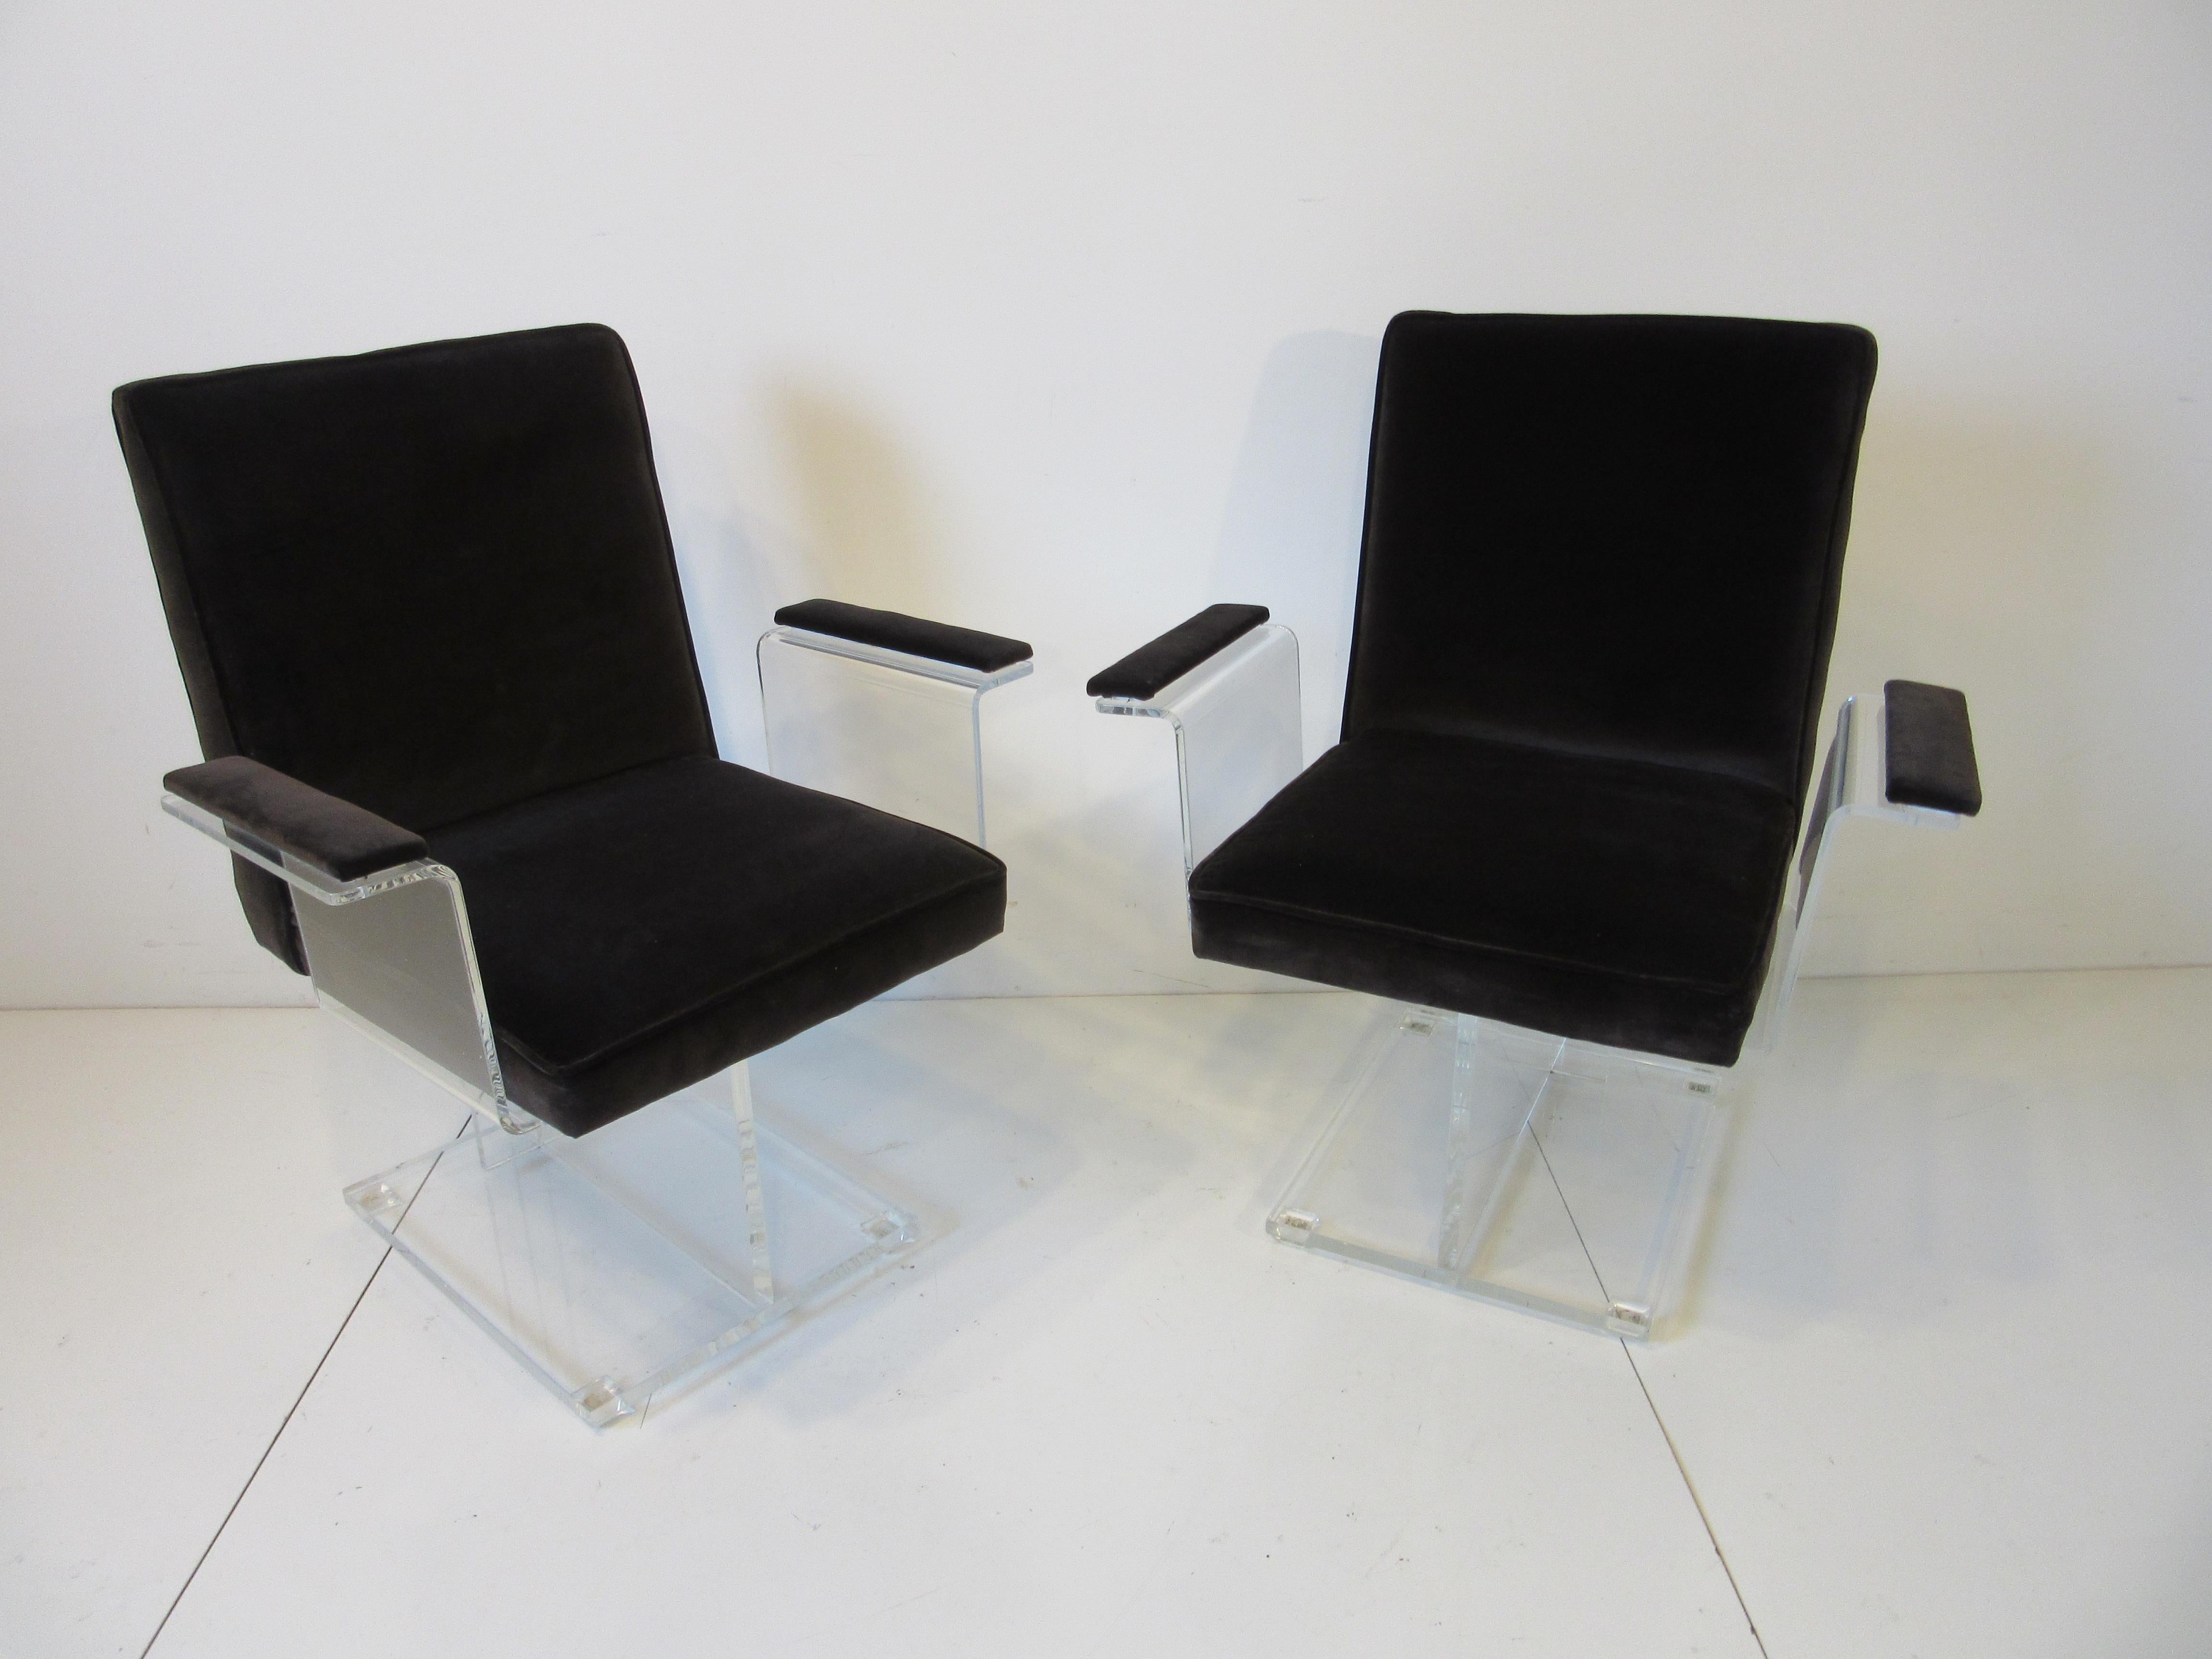 A pair of Kagan Lucite pedestal armchairs upholstered in a dark chocolate velvet fabric having a great sculptural look with matching arm rests. Small Lucite foot pads attached to the square base help protect your floors, a rare form manufactured by